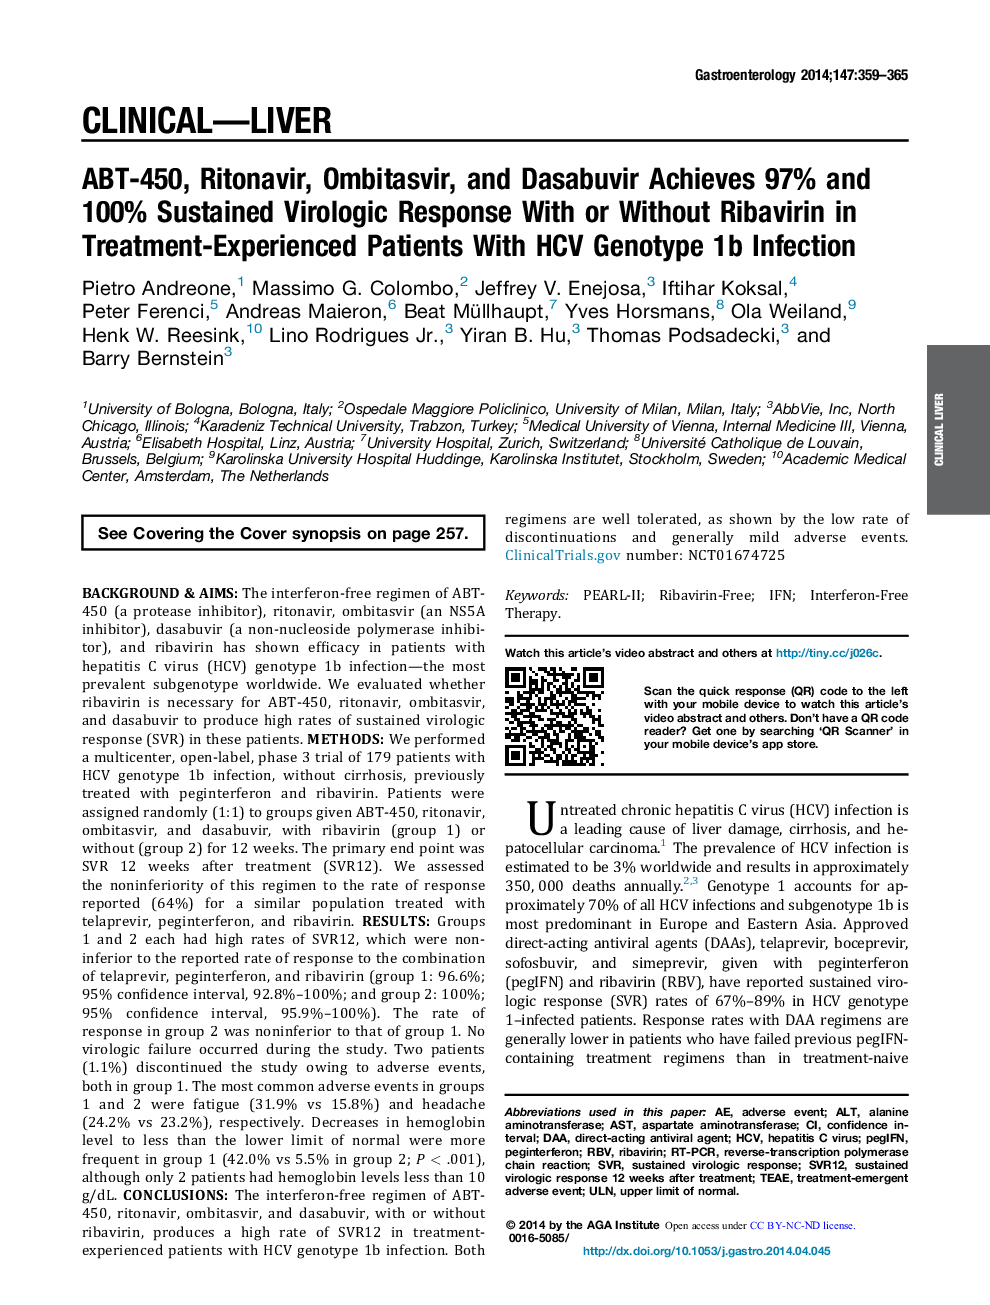 Original ResearchFull Report: Clinical-LiverABT-450, Ritonavir, Ombitasvir, and Dasabuvir Achieves 97% and 100% Sustained Virologic Response With or Without Ribavirin in Treatment-Experienced Patients With HCV Genotype 1b Infection